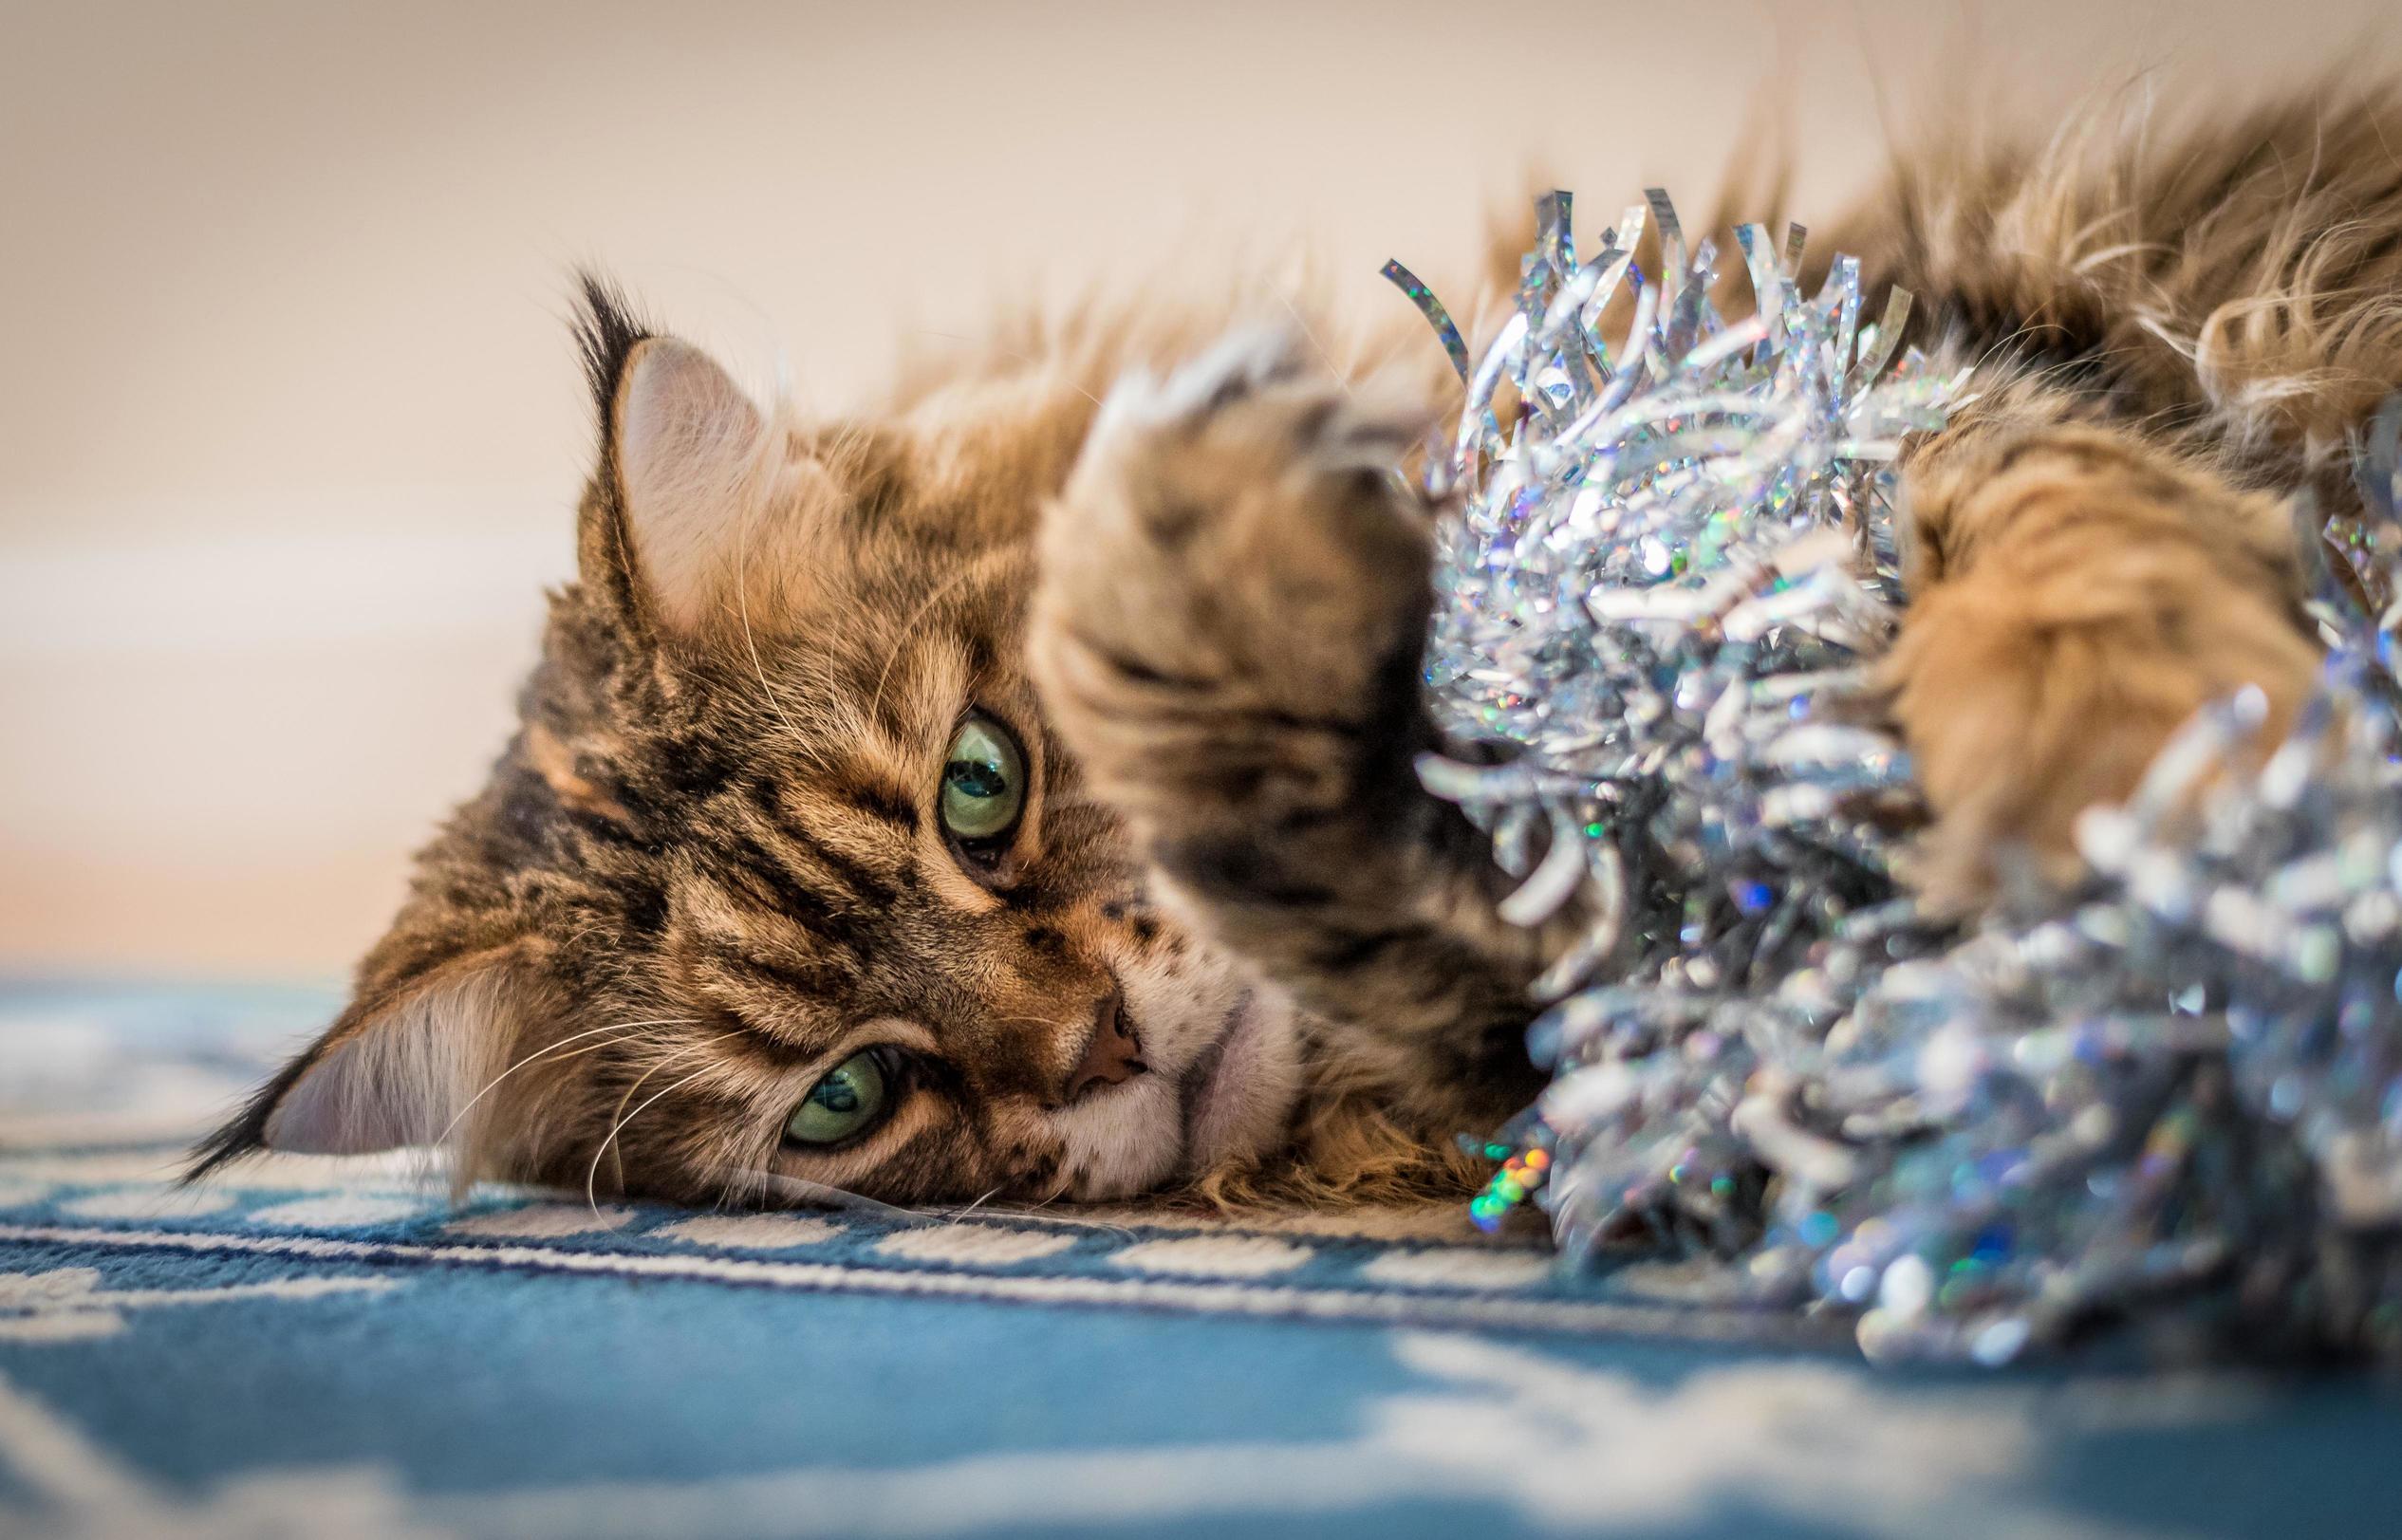 Ok tinsel you win this round.